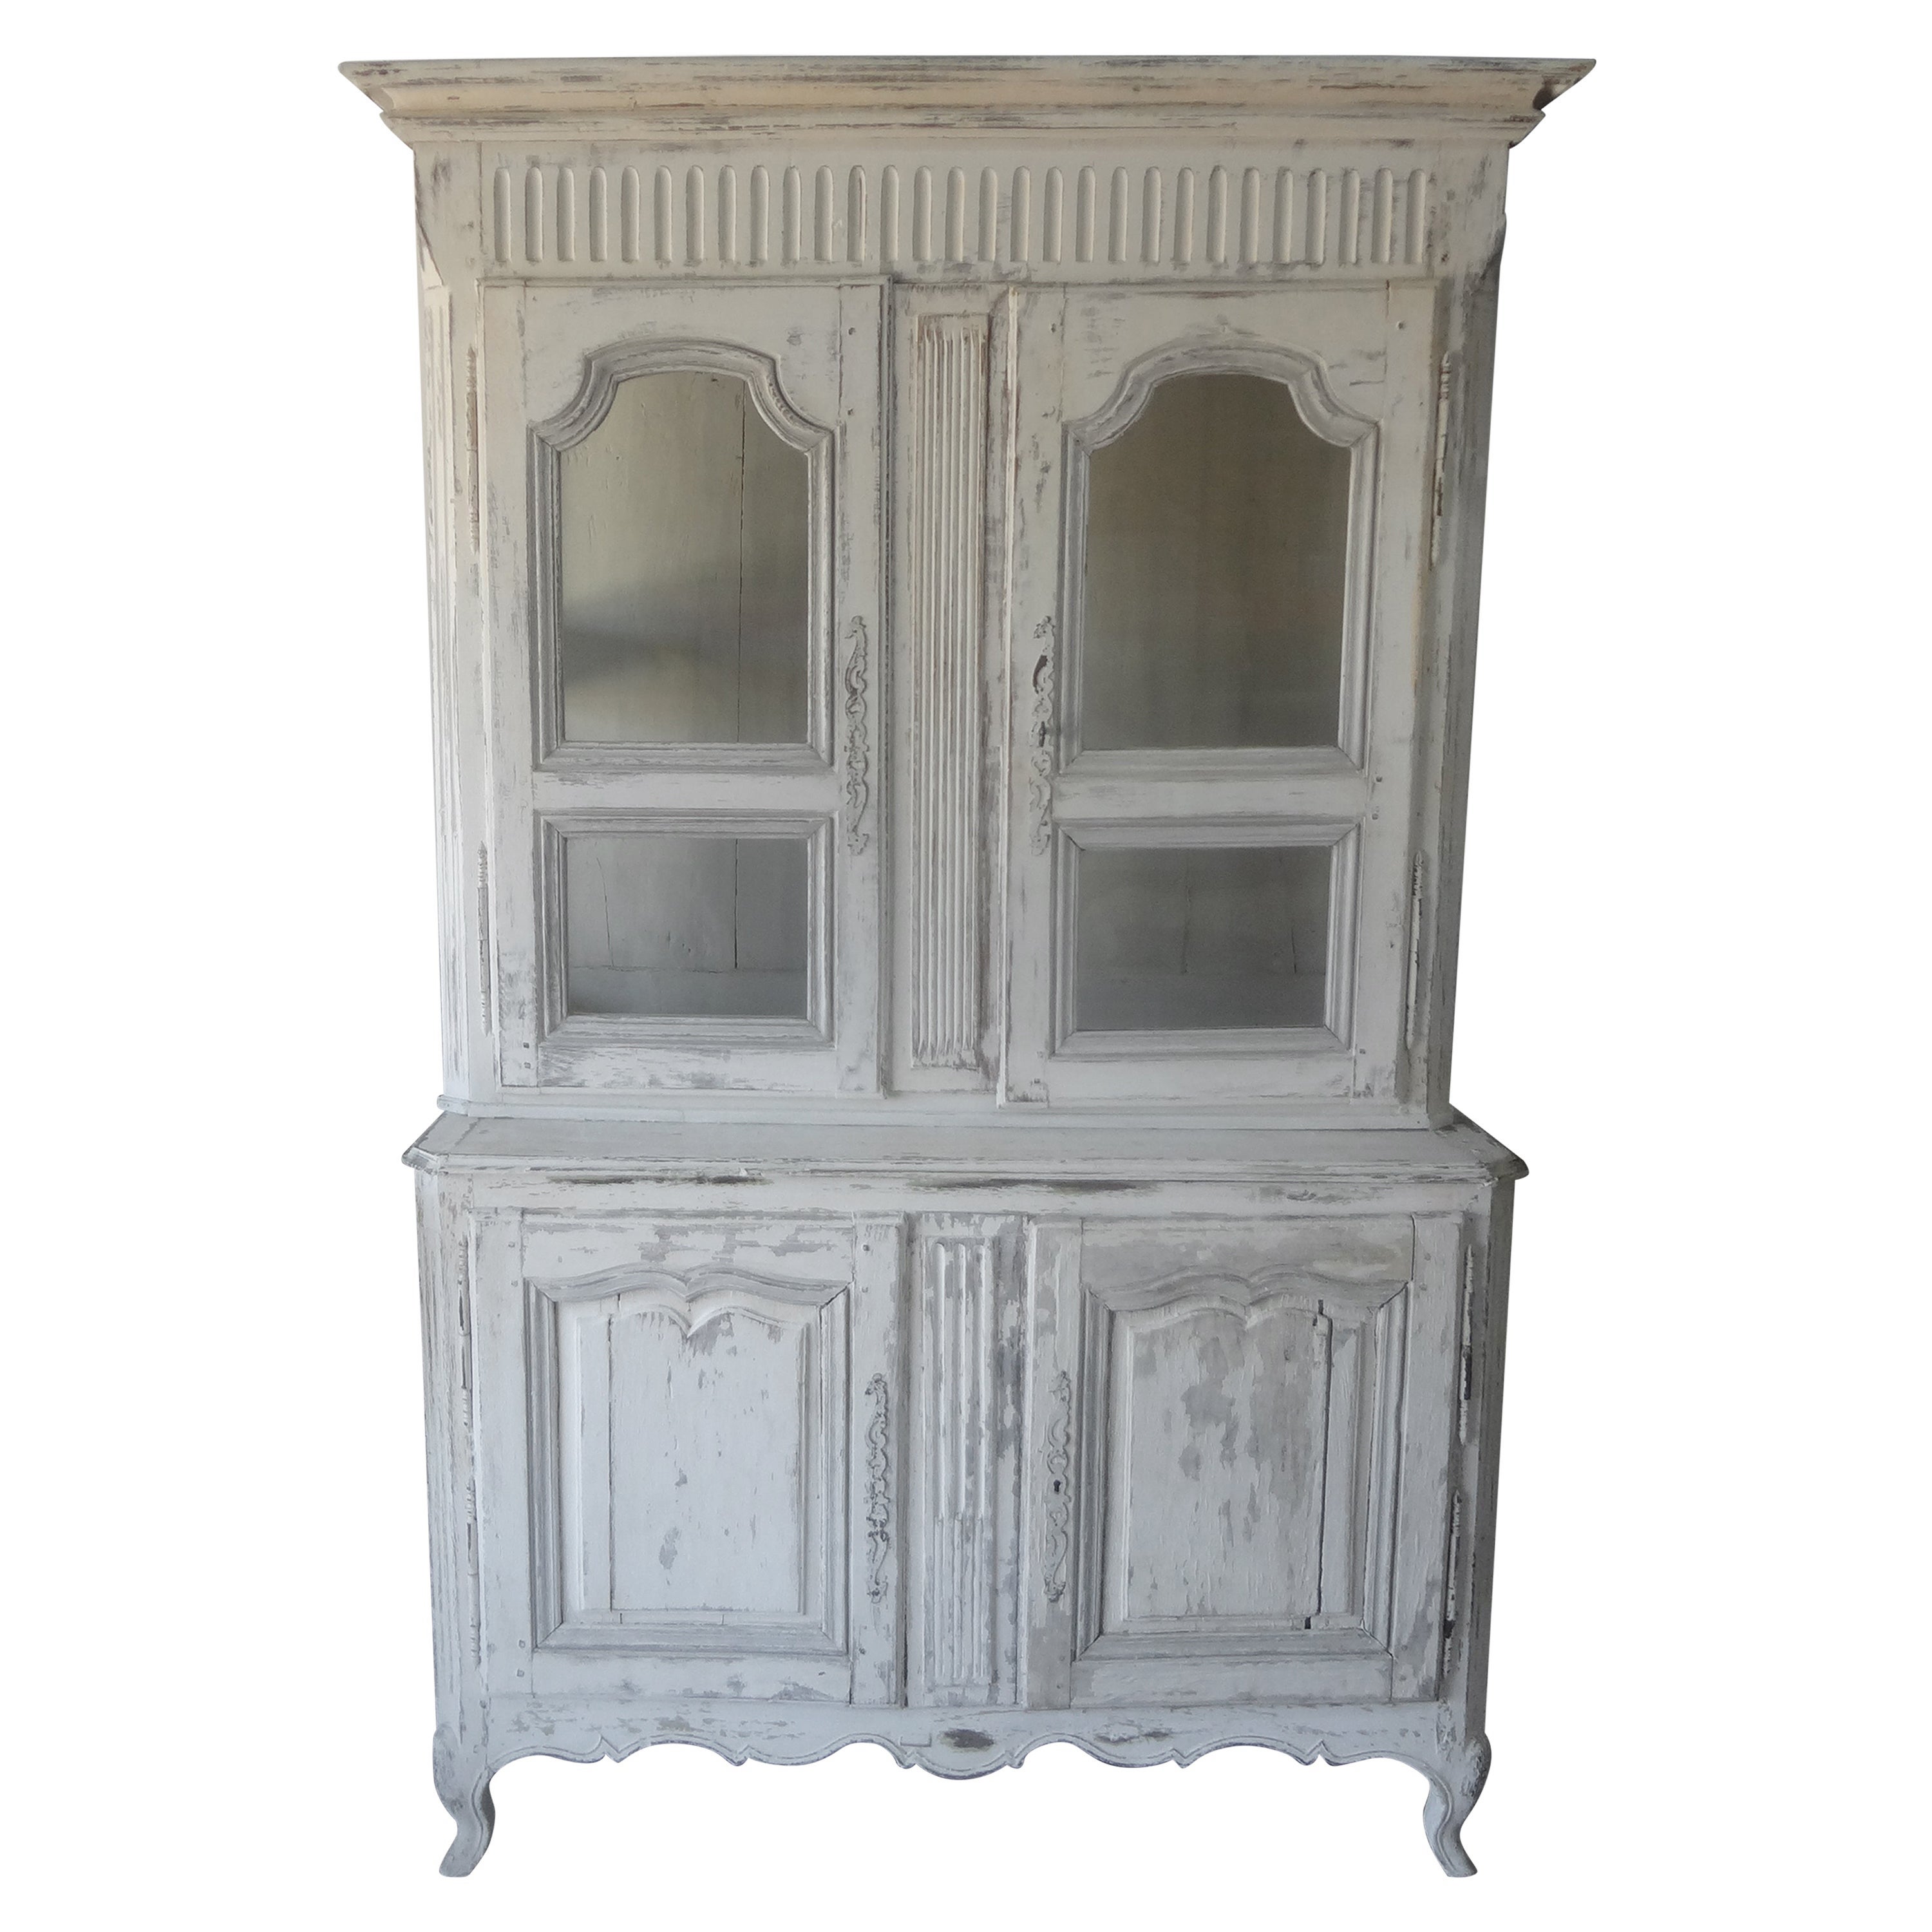 18th Century French Louis XV Buffet Deux Corp or Cupboard